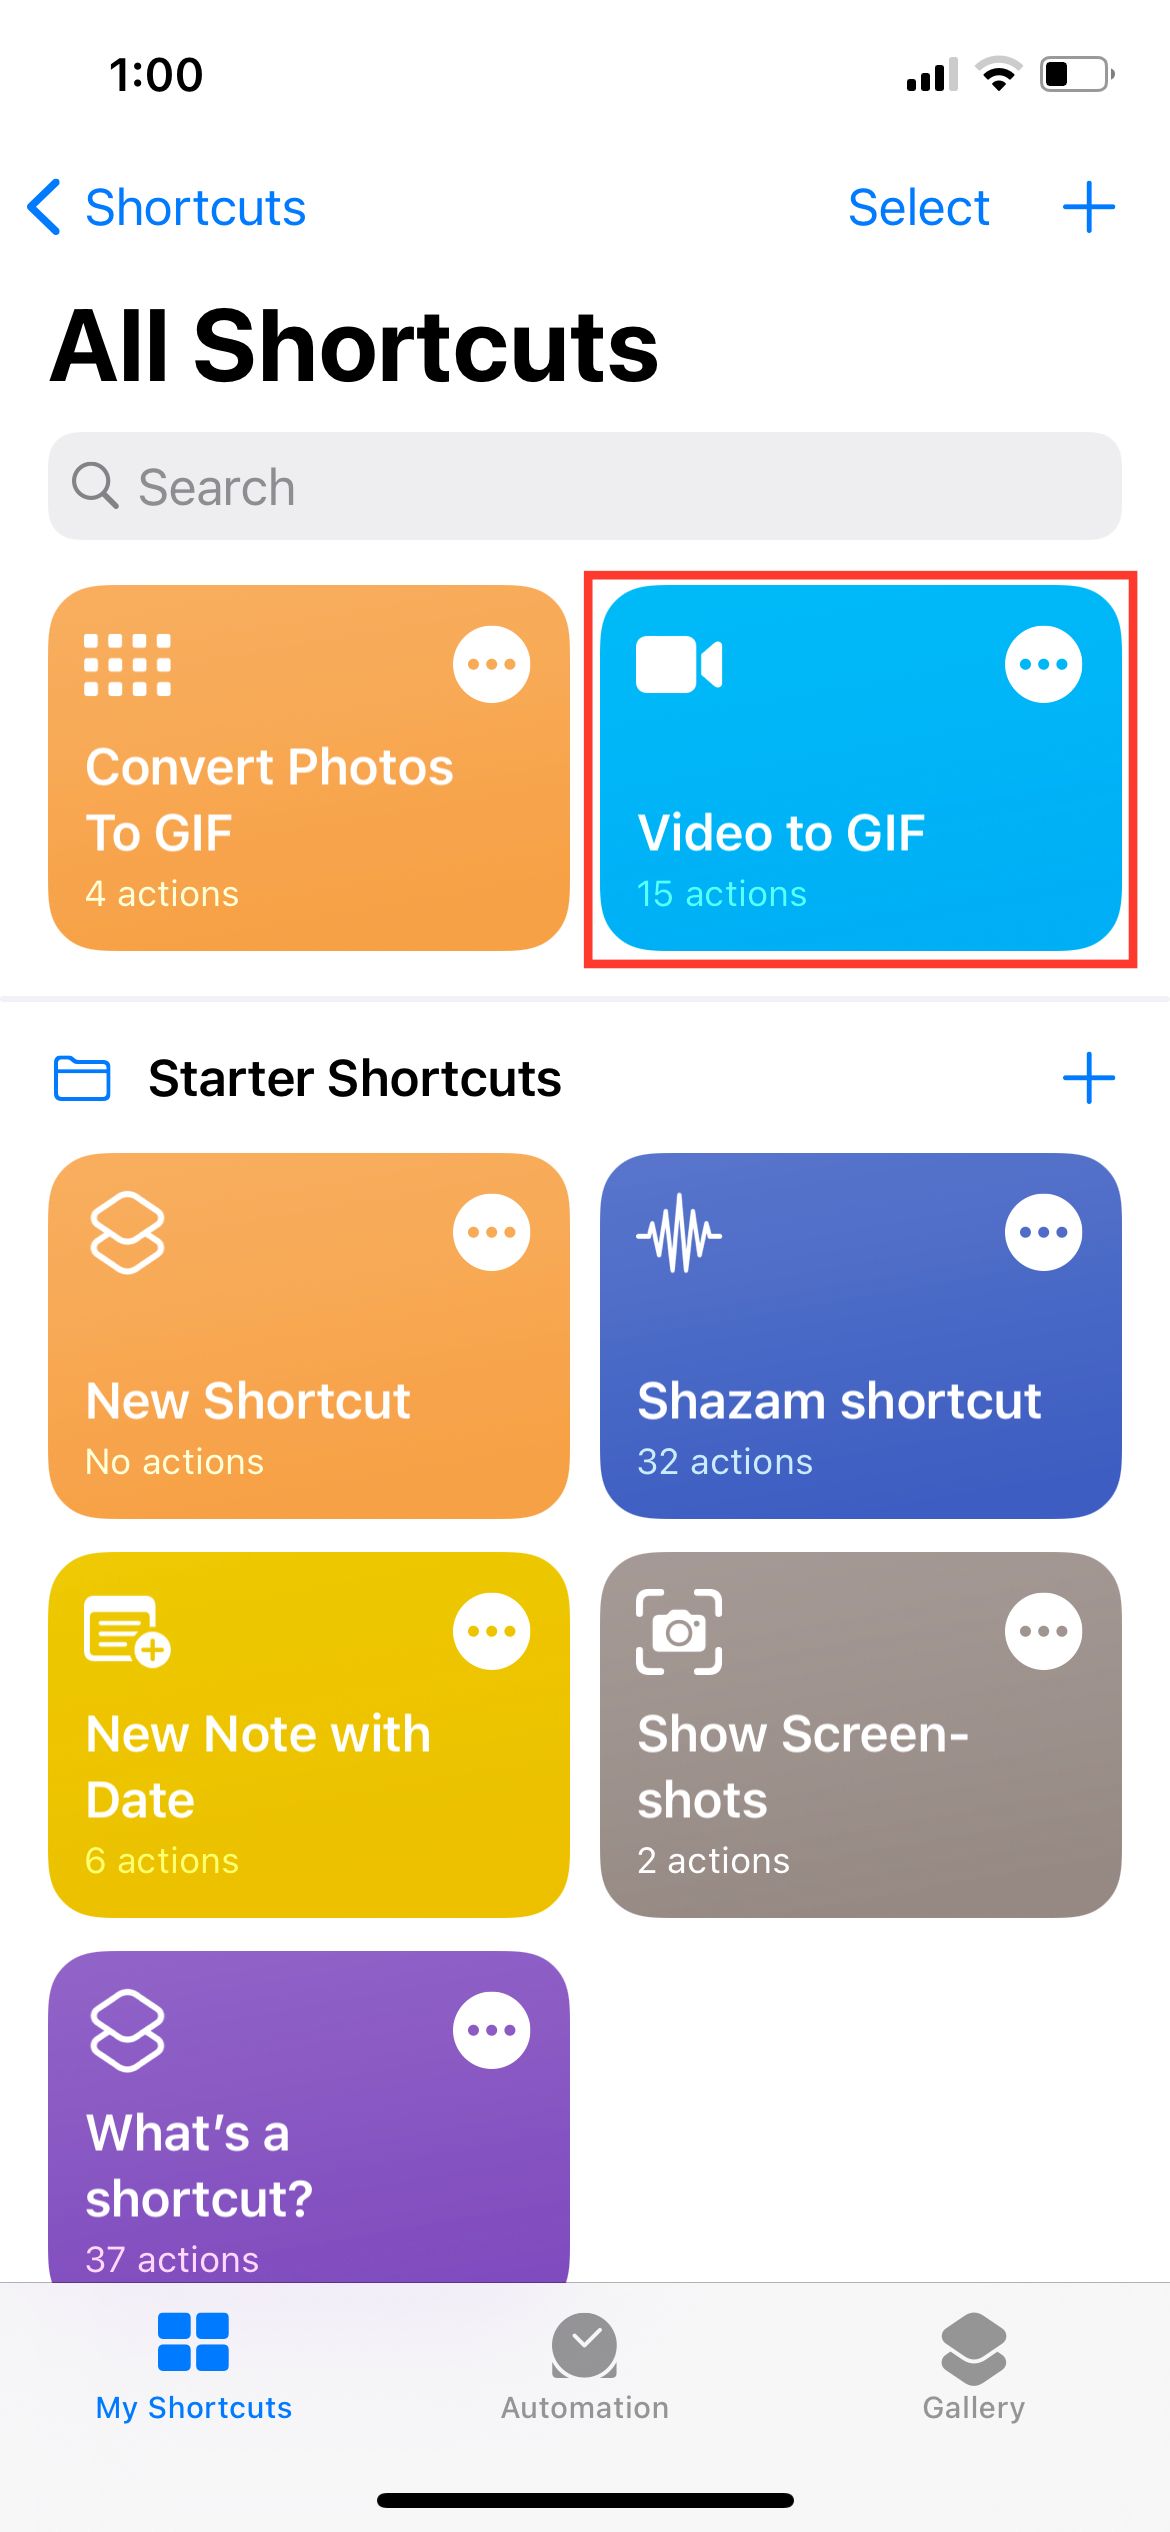 Video to GIF Shortcut on My Shortcuts